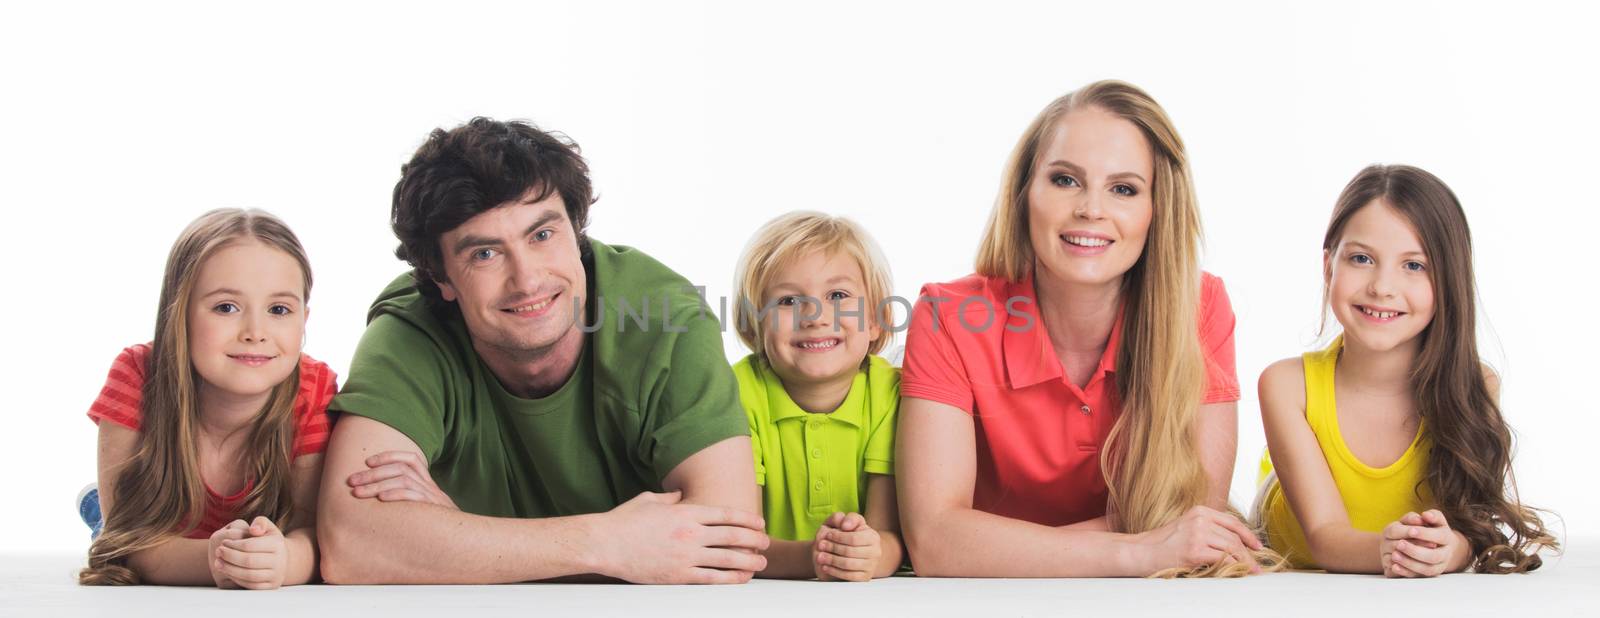 Happy smiling family of two parents and three children lying on the floor studio isolated on white background